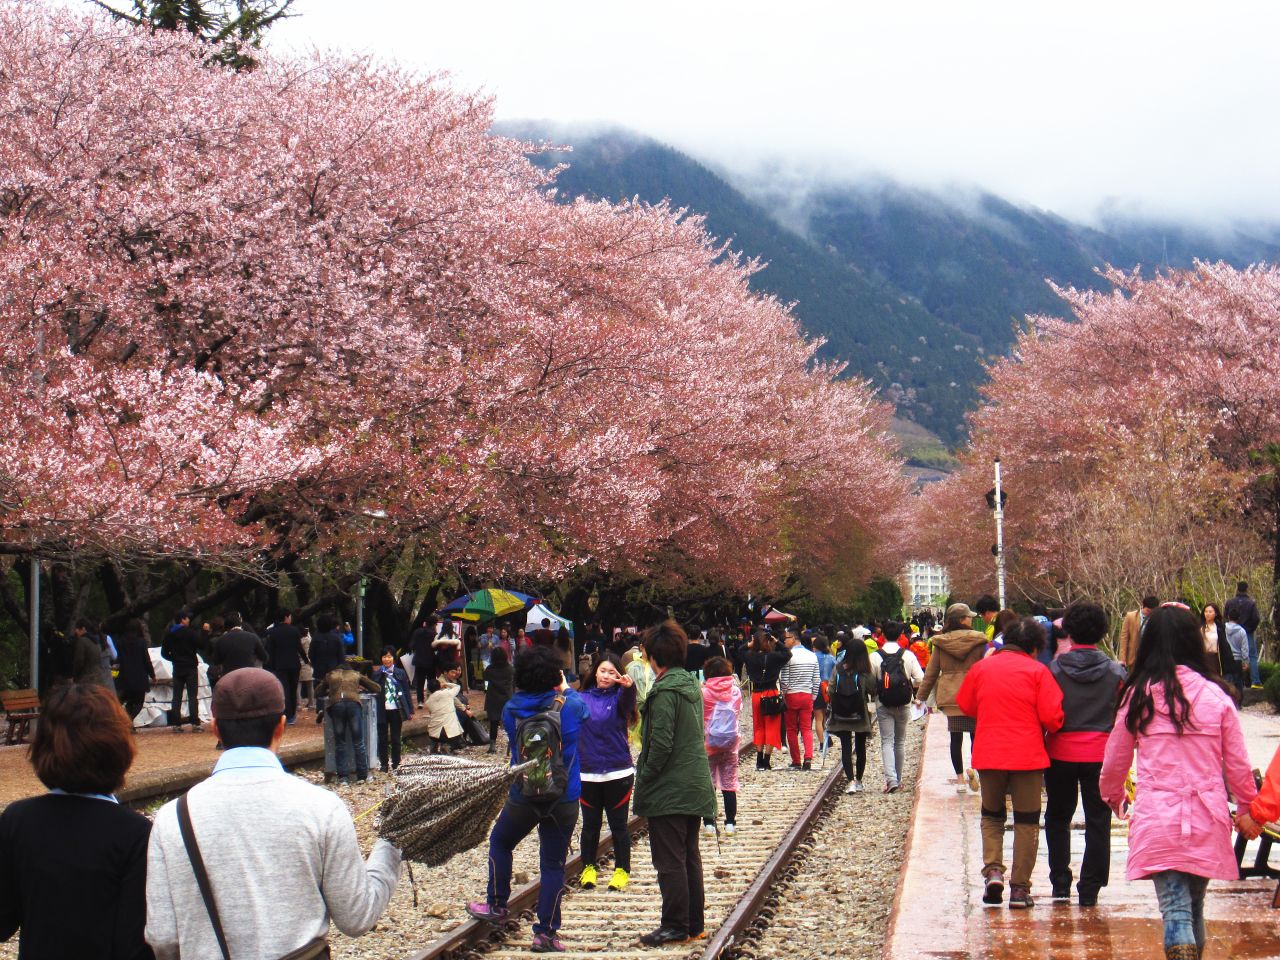 Some 340,000 trees line Jinhae's streets, rivers and train tracks, and dot surrounding mountainsides. The annual Jinhae Cherry Blossom Festival wraps up this week.